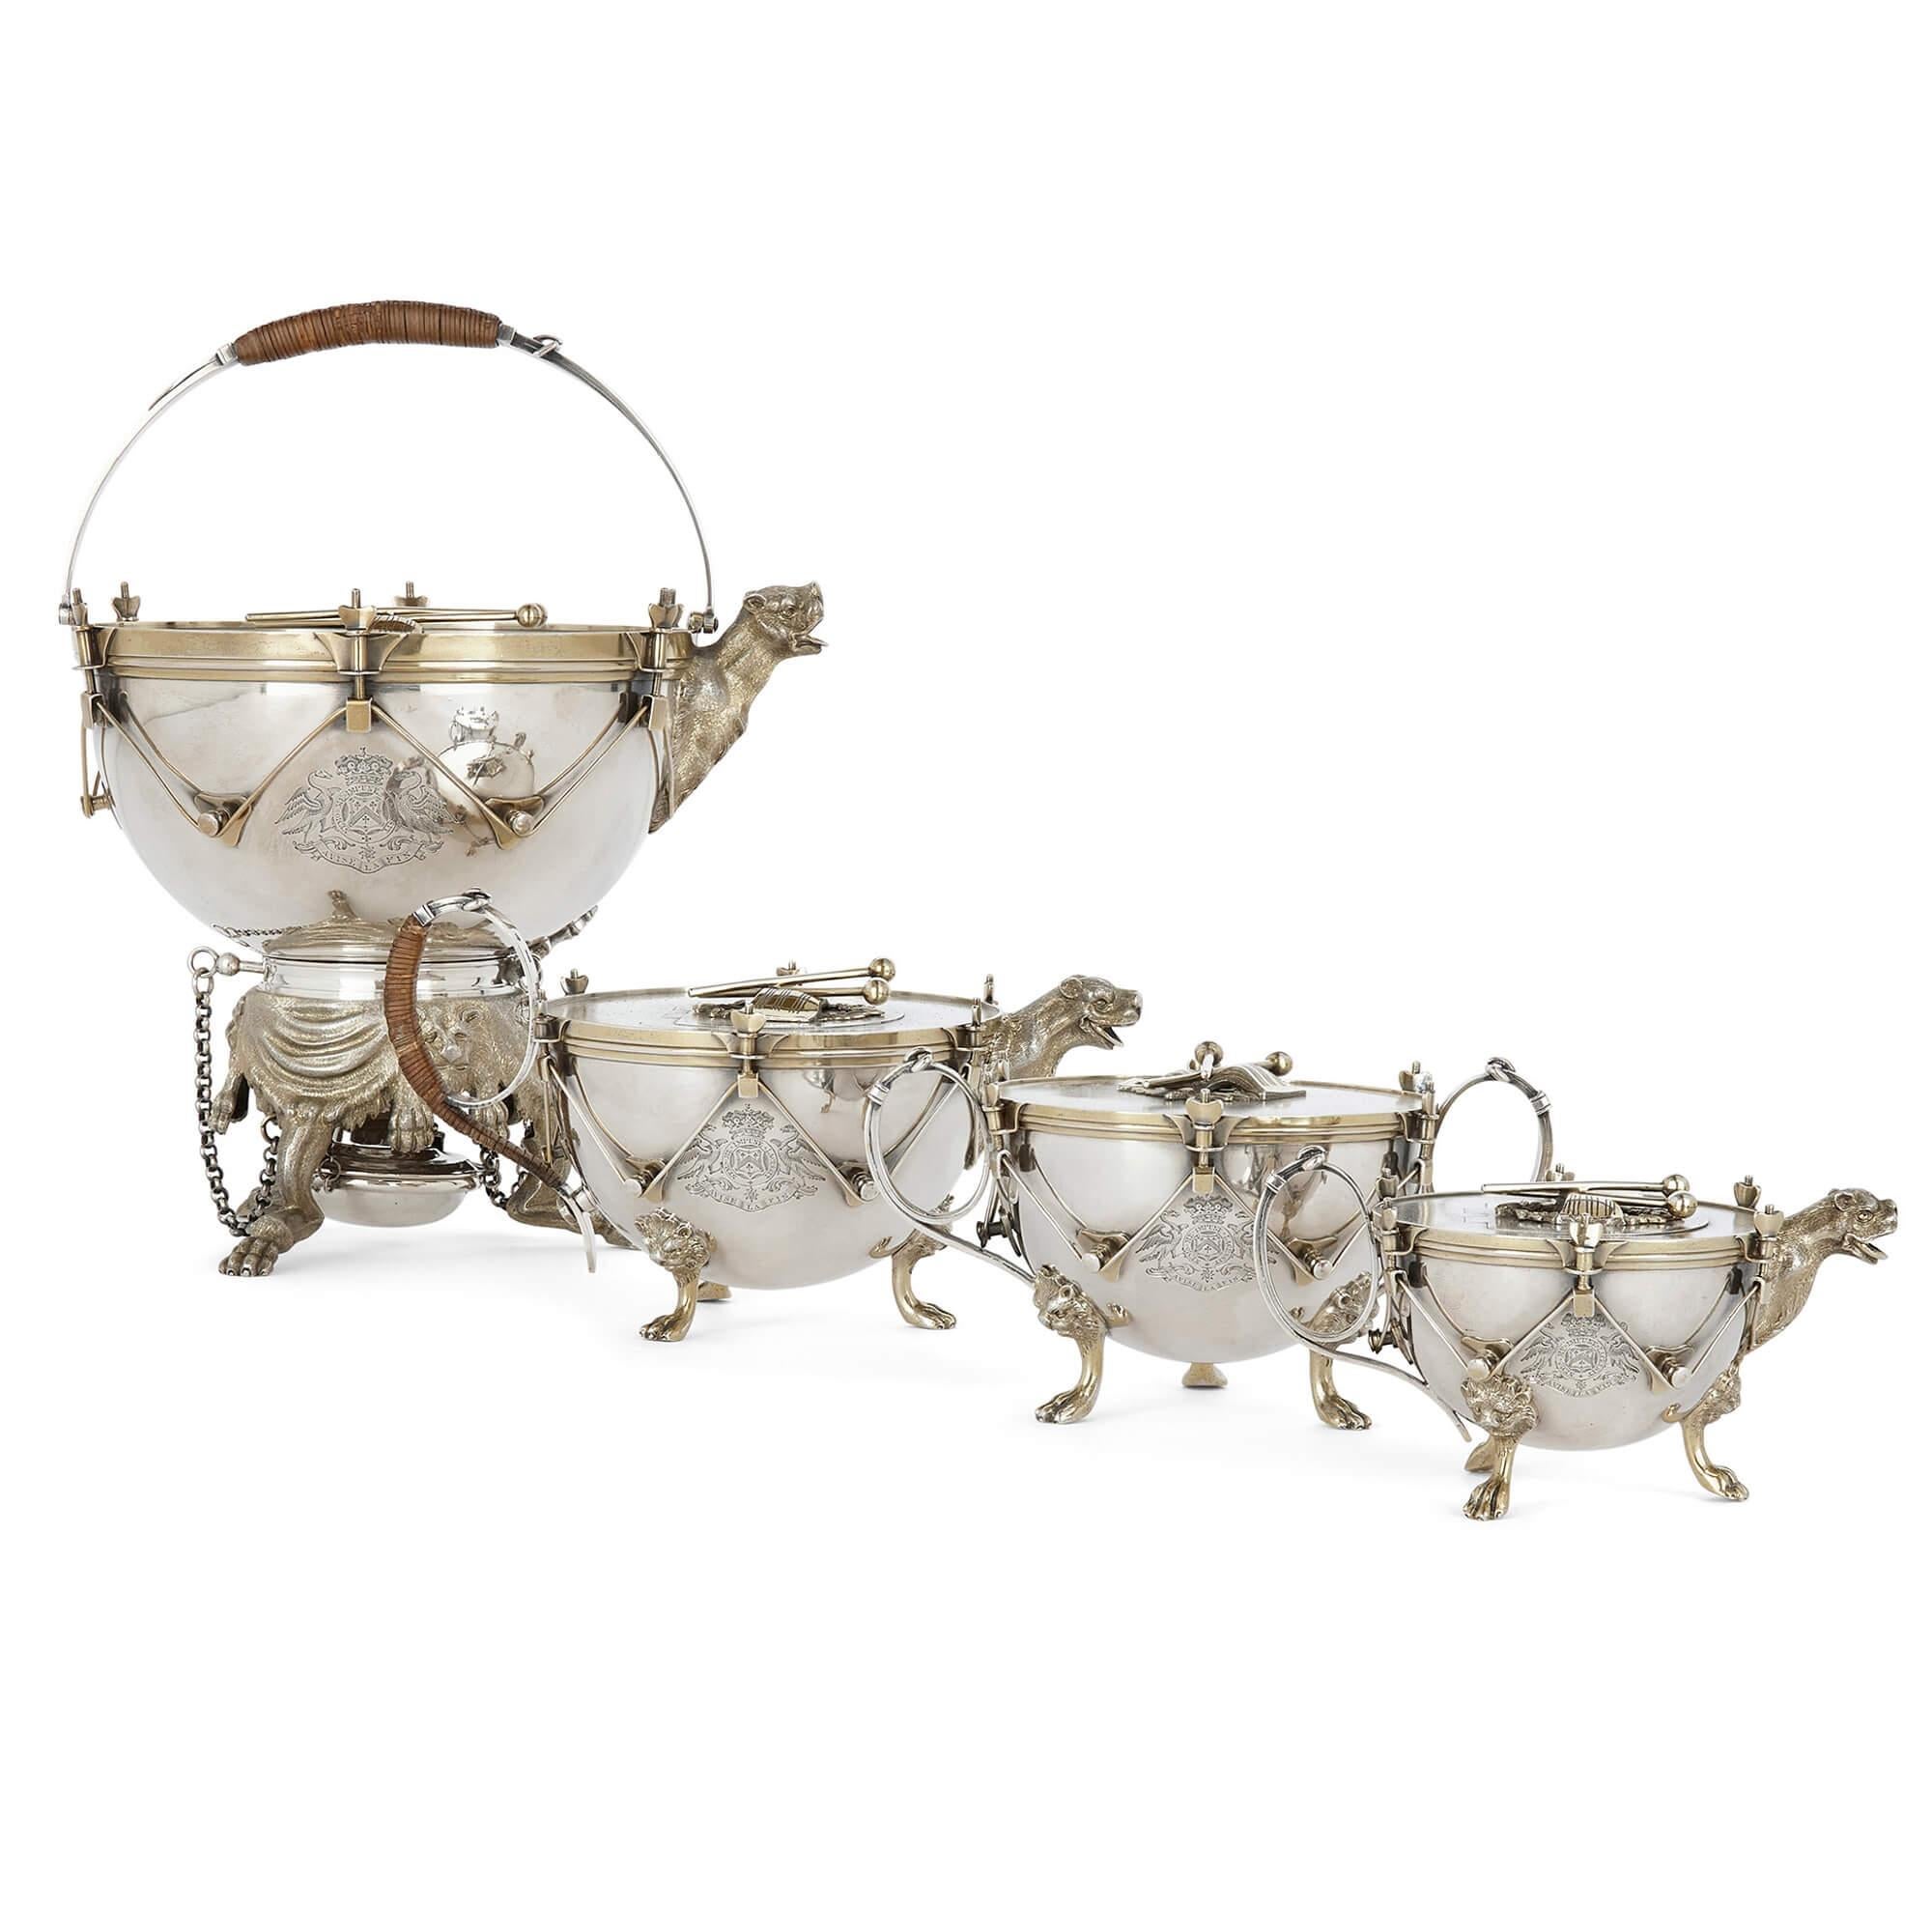 Rare Victorian silver tea and coffee set by Edward C. Brown
English, 1867 
Milk jug: Height 7.5cm, width 14cm, depth 10cm
Teapot on stand: Height 29cm, width 23cm, depth 20cm

Crafted by Edward Charles Brown, a distinguished Victorian silversmith,